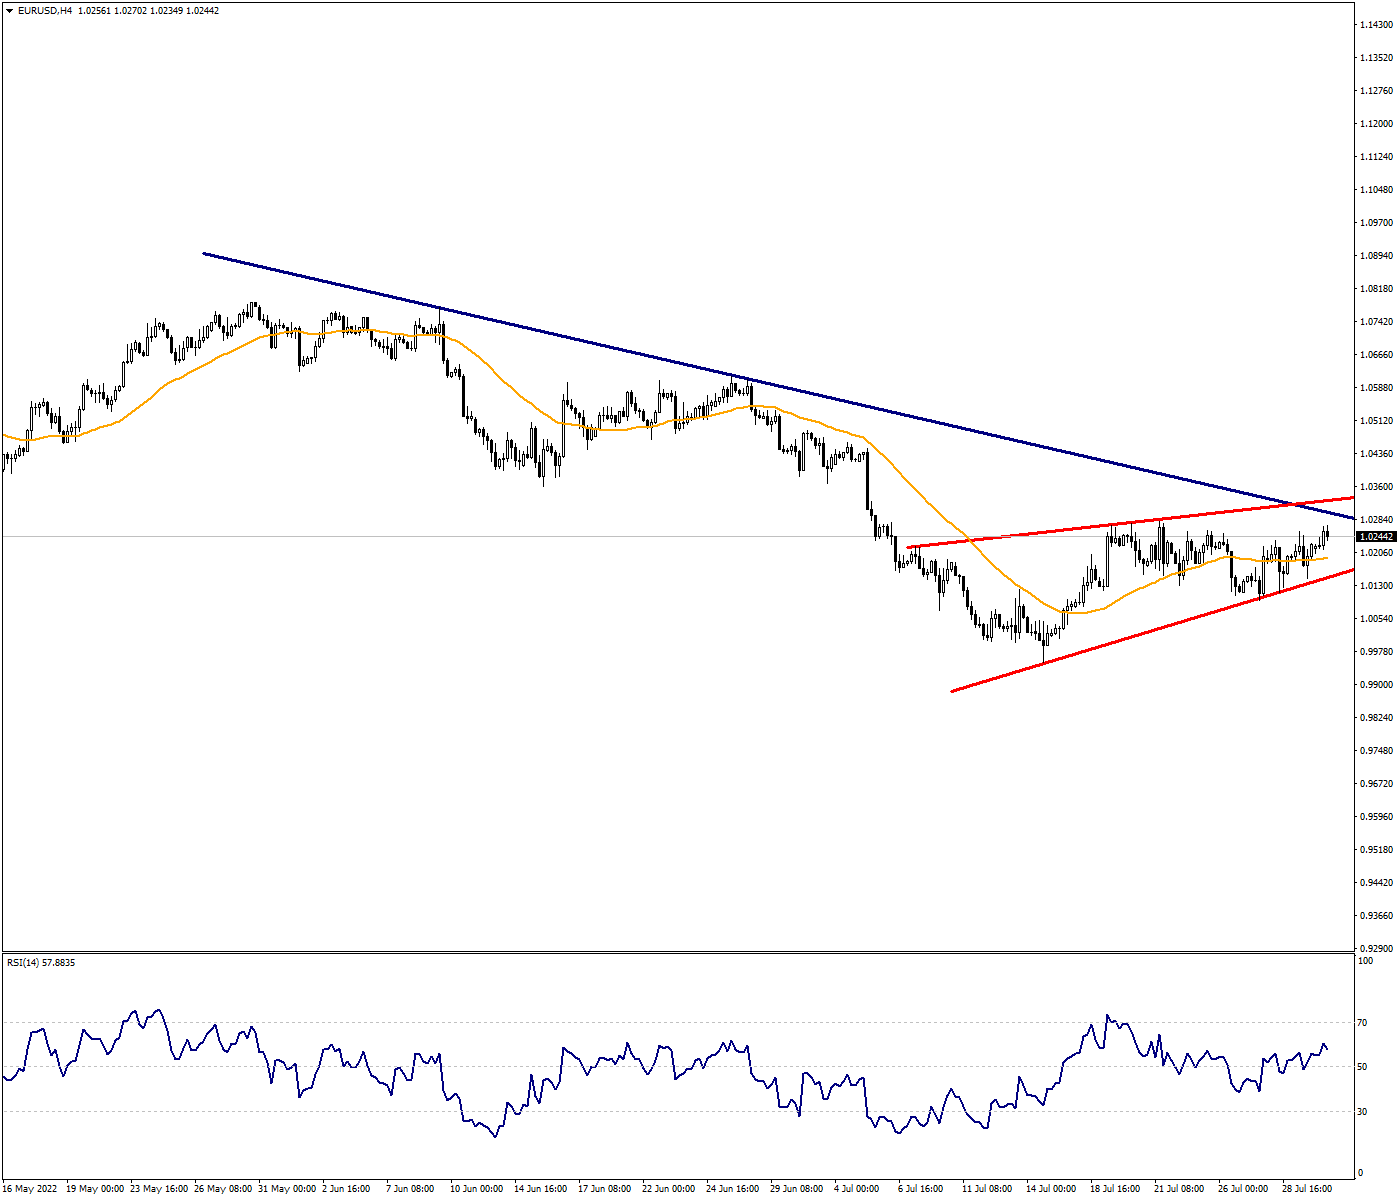 EURUSD:The Parity Unable to Relieve the Pressure